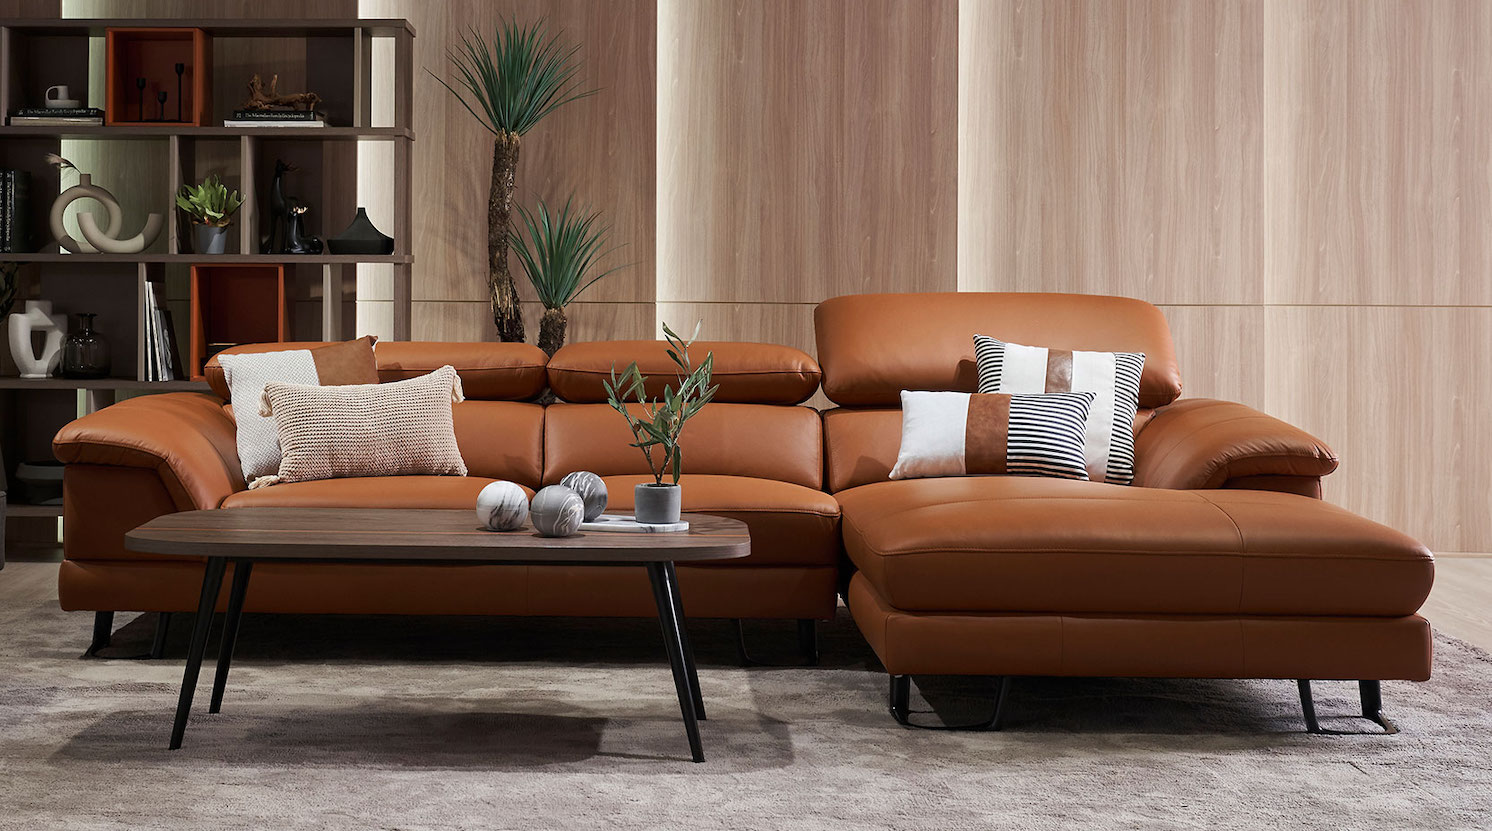 Choosing The Right Home Furniture Upholstery & Materials In Malaysia For Your Home